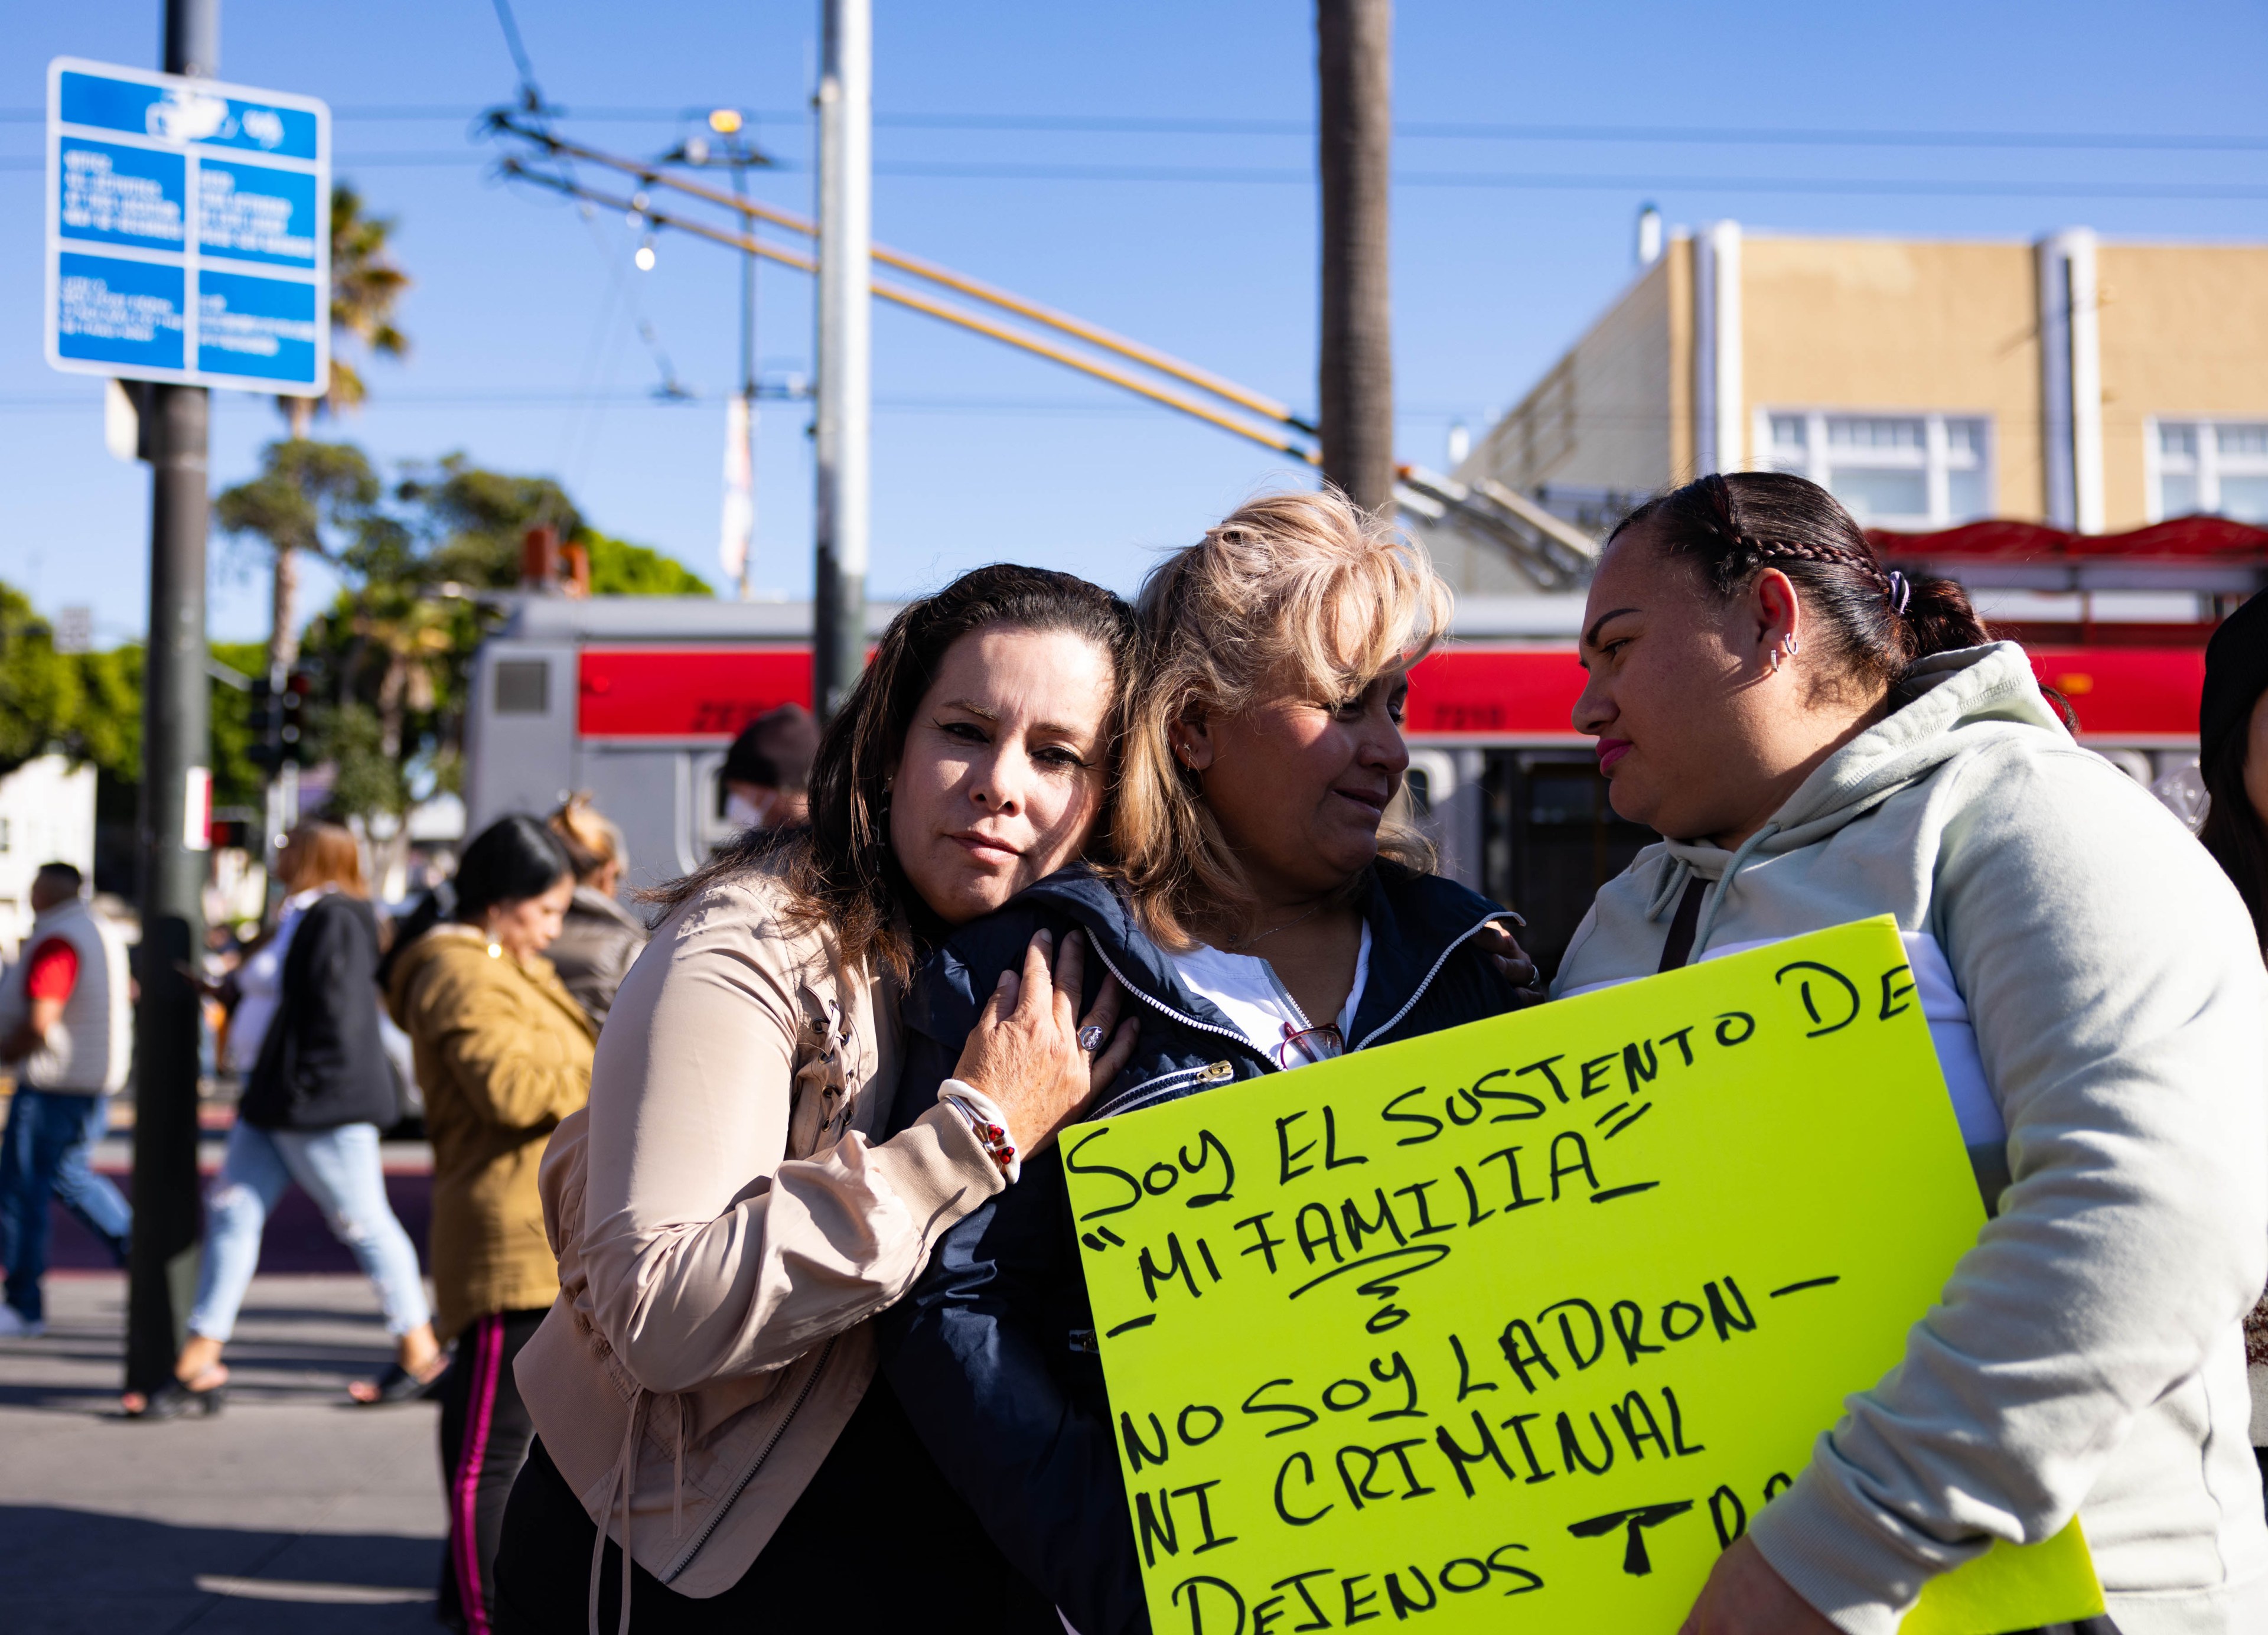 3 women comforting one another with a sign that reads "Soy el sustento De 'Mi Familia' - No Soy Ladon Ni Criminal ..."